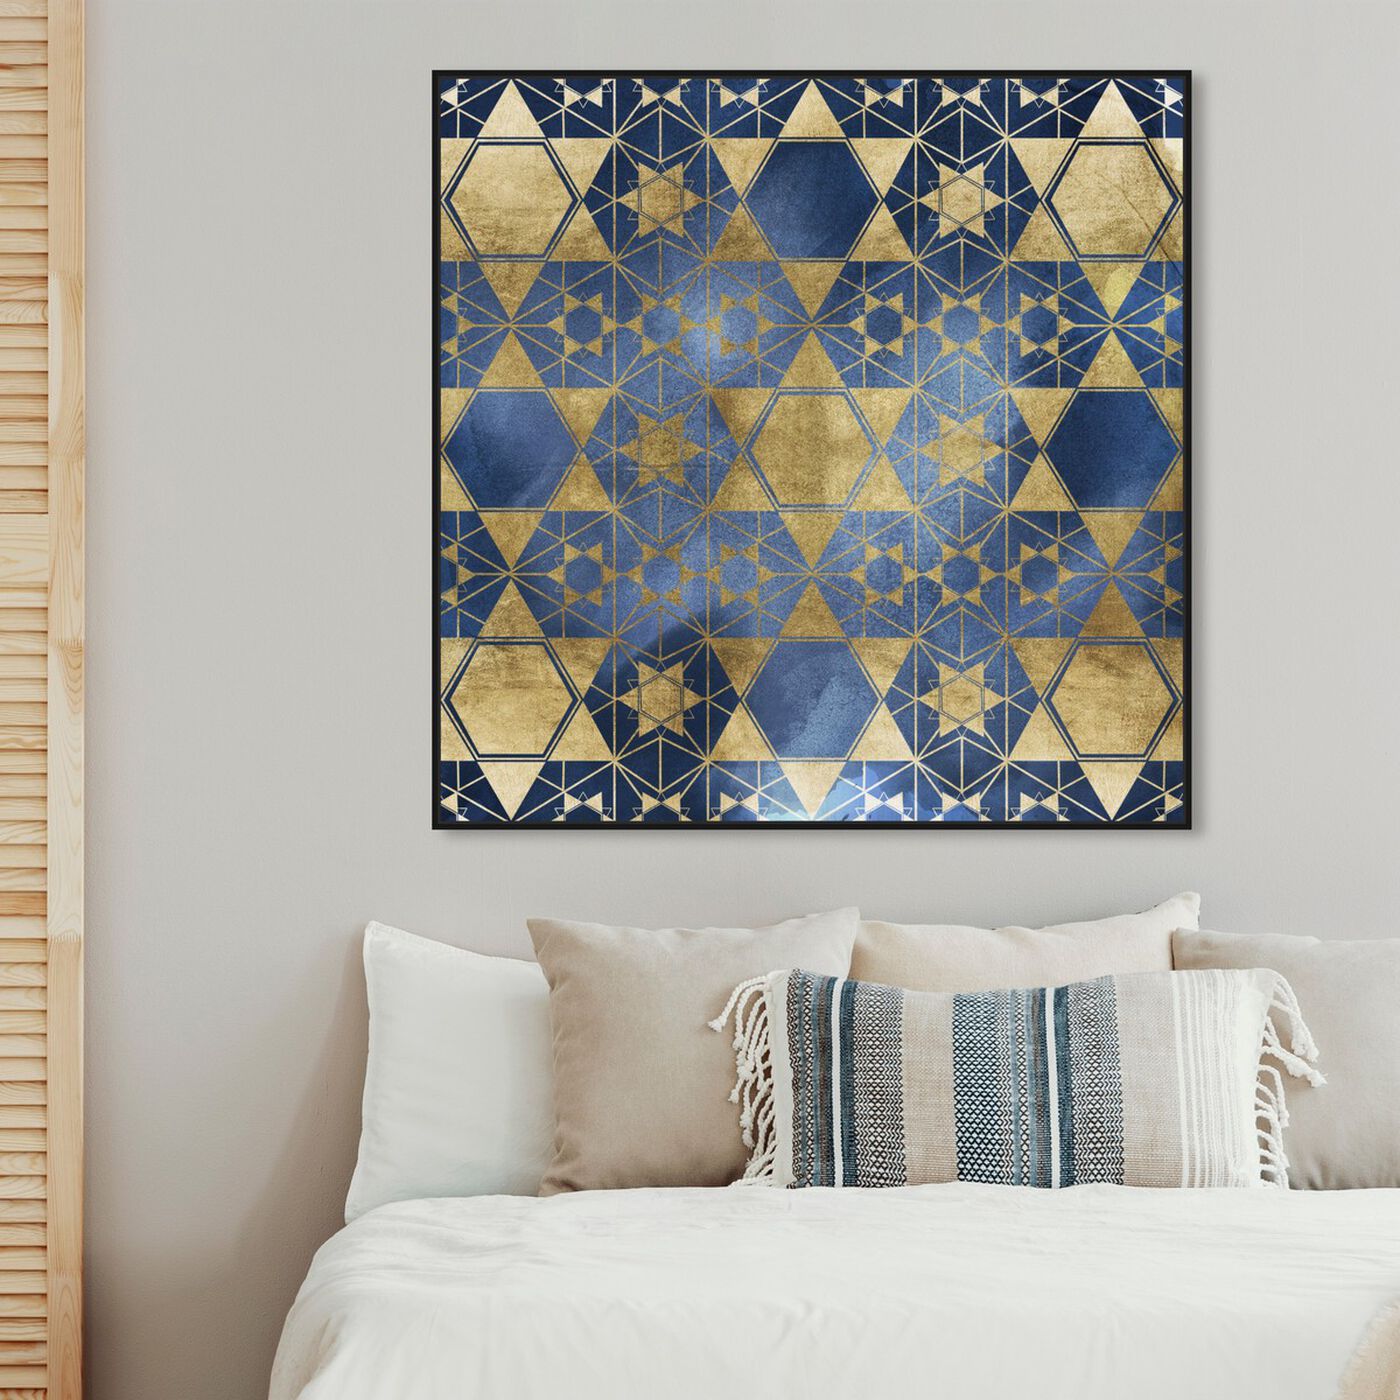 Hanging view of Golden Blue Star Decorative featuring abstract and patterns art.